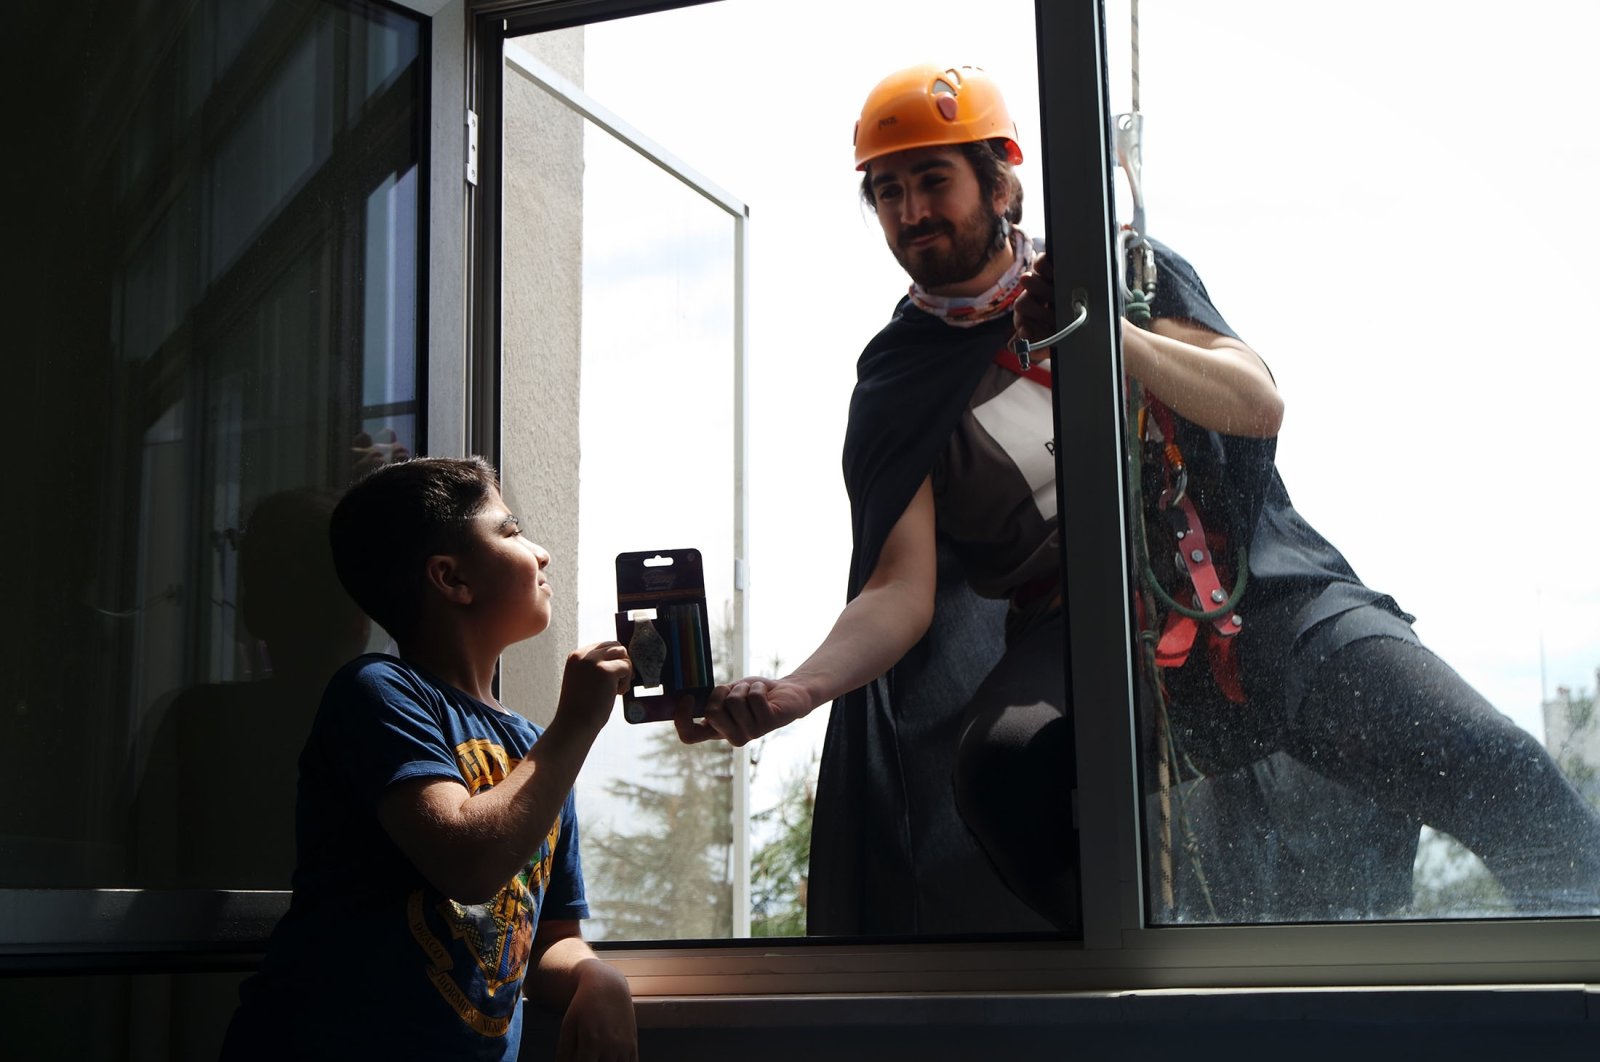 A college student dressed as a superhero gives a child a gift at his window at Uludağ University Hospital, in Bursa, Turkey, April 21, 2022. (AA Photo)